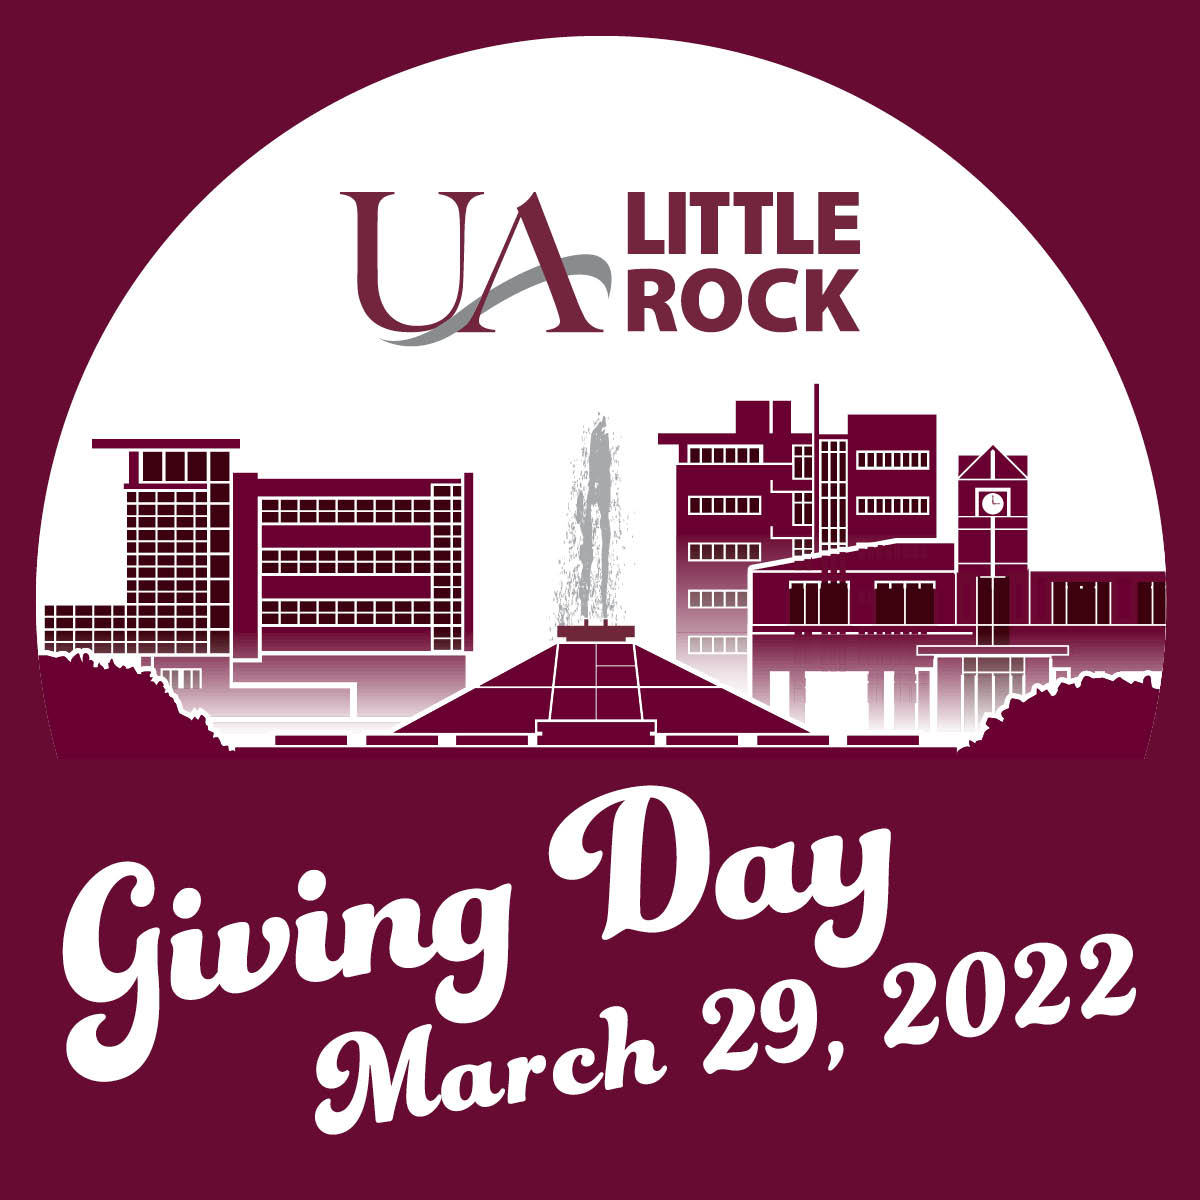 UA little Rock will celebrate Giving Day 2022 on March 29.